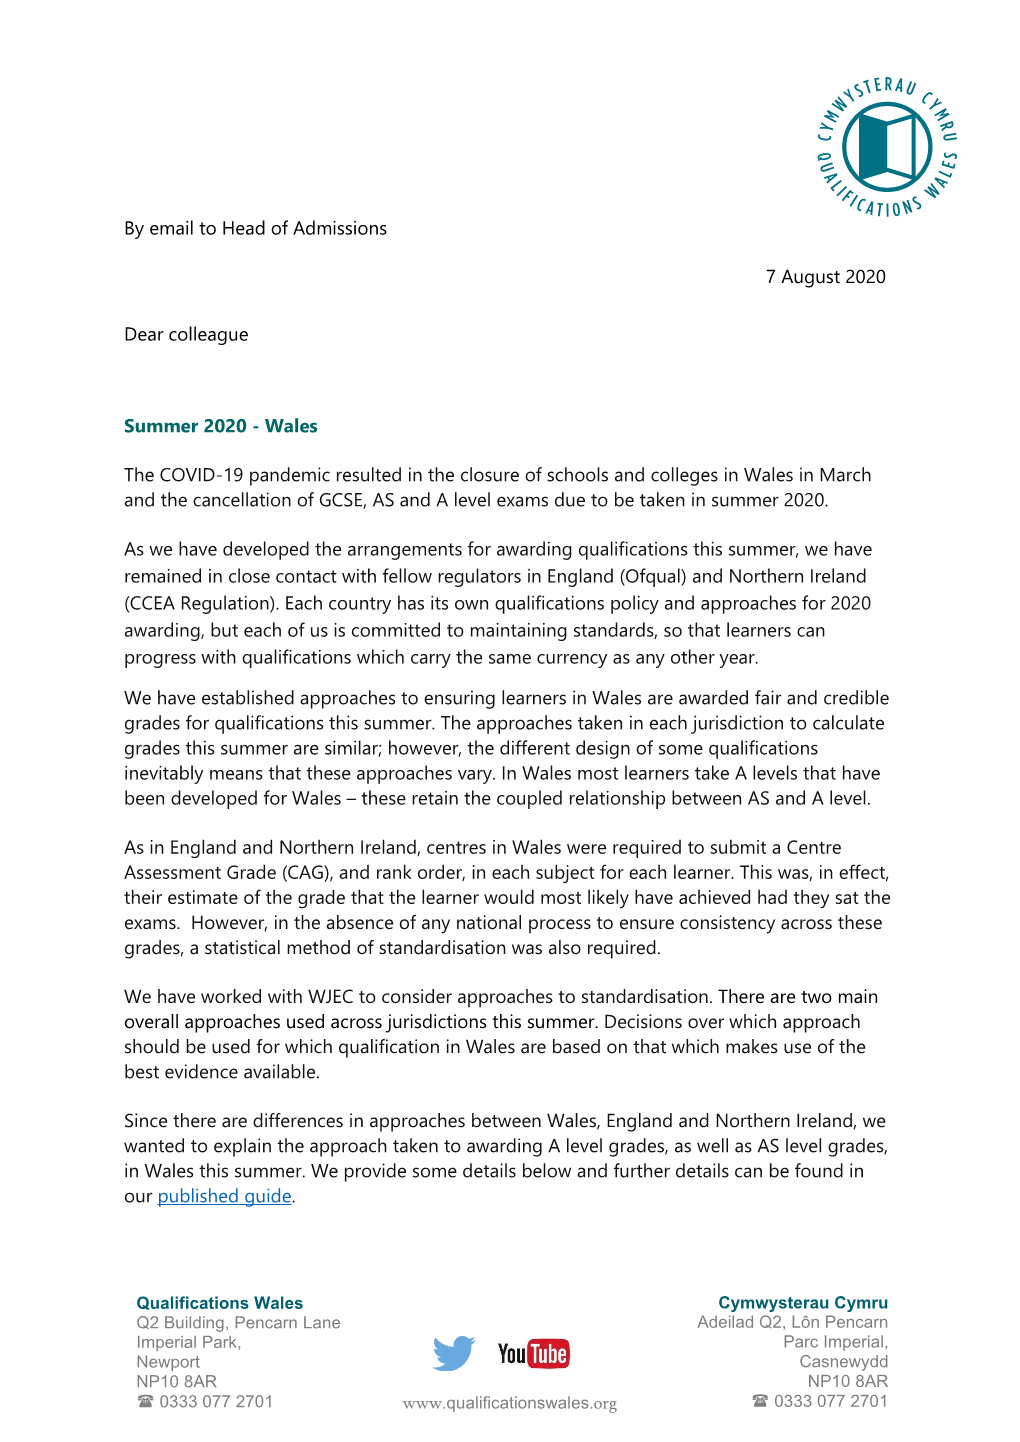 Our Letter to HE Heads of Admissions, Explaining